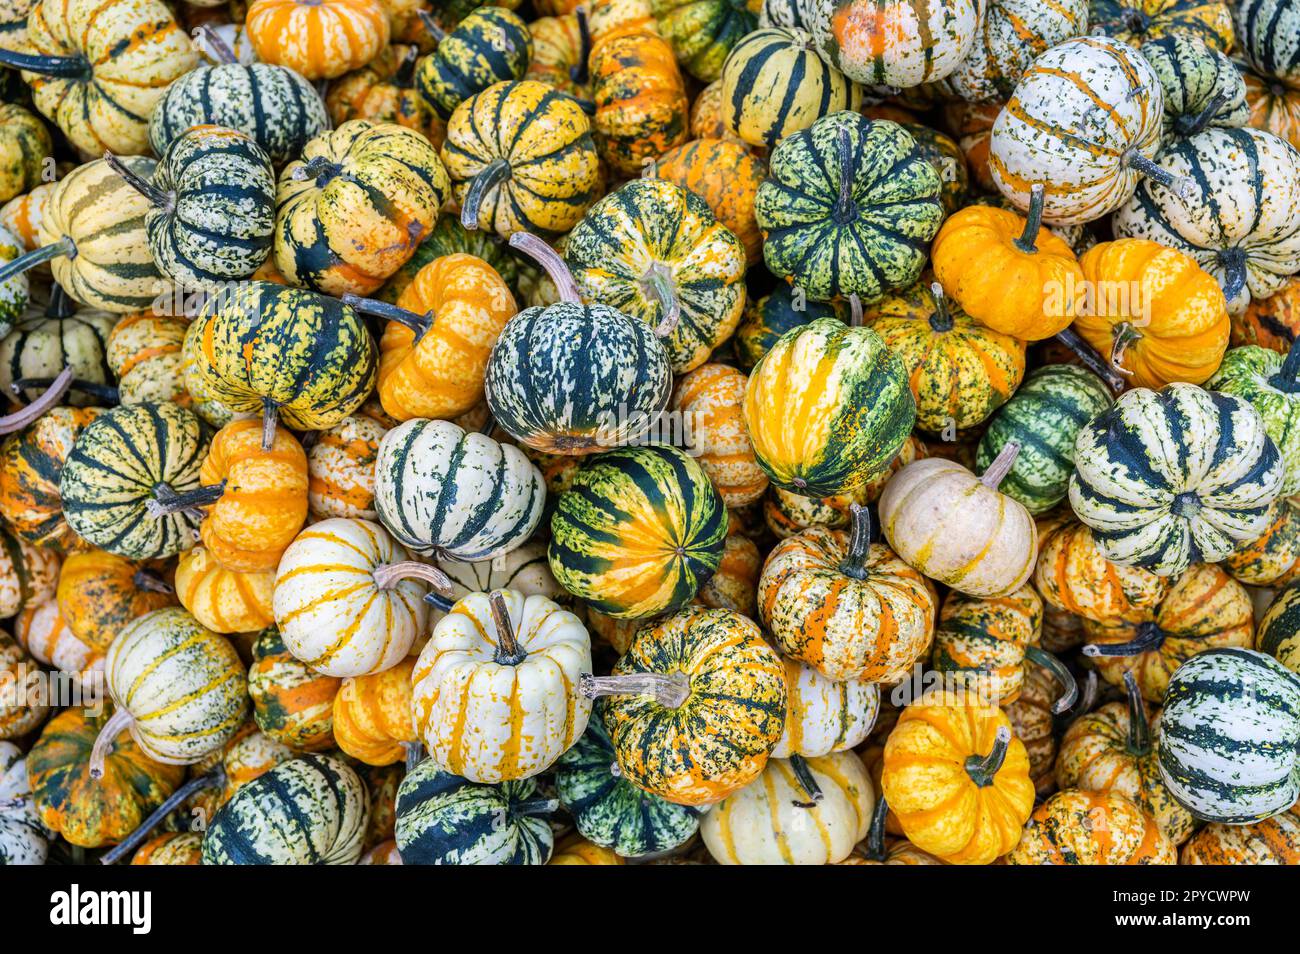 Small round striped eatable pumpkin ornamental gourds for sale during October thanksgiving Halloween for sale, high angle view Stock Photo